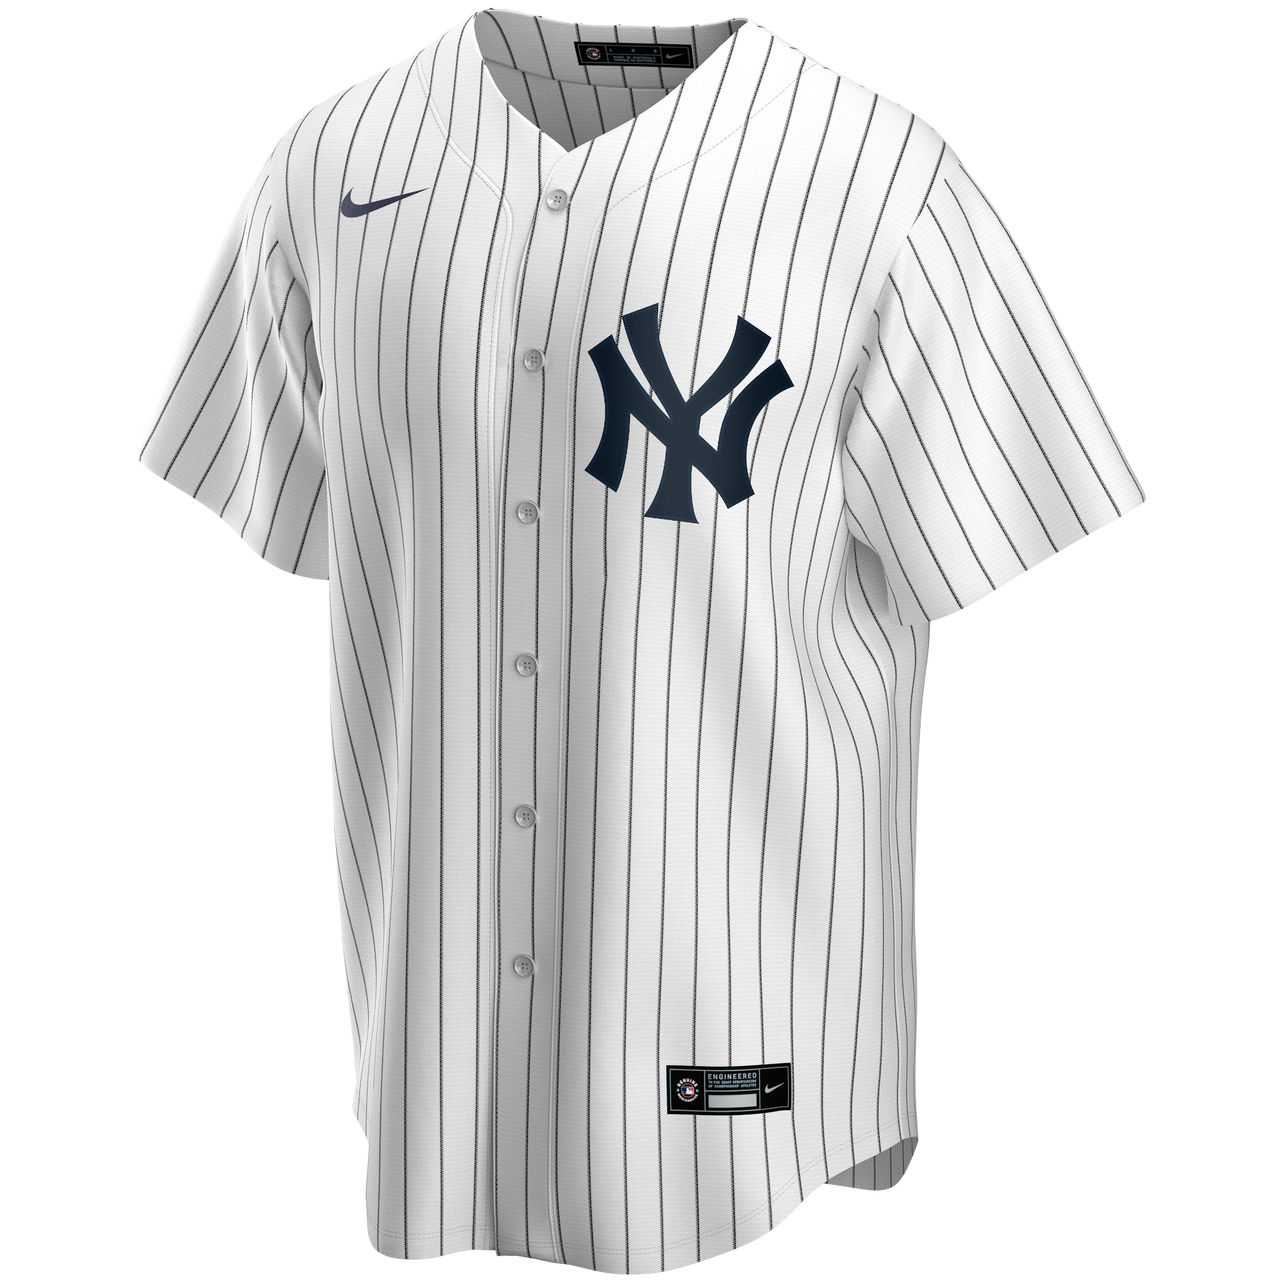 Aaron Judge Jersey - NY Yankees Replica Adult Home Jersey